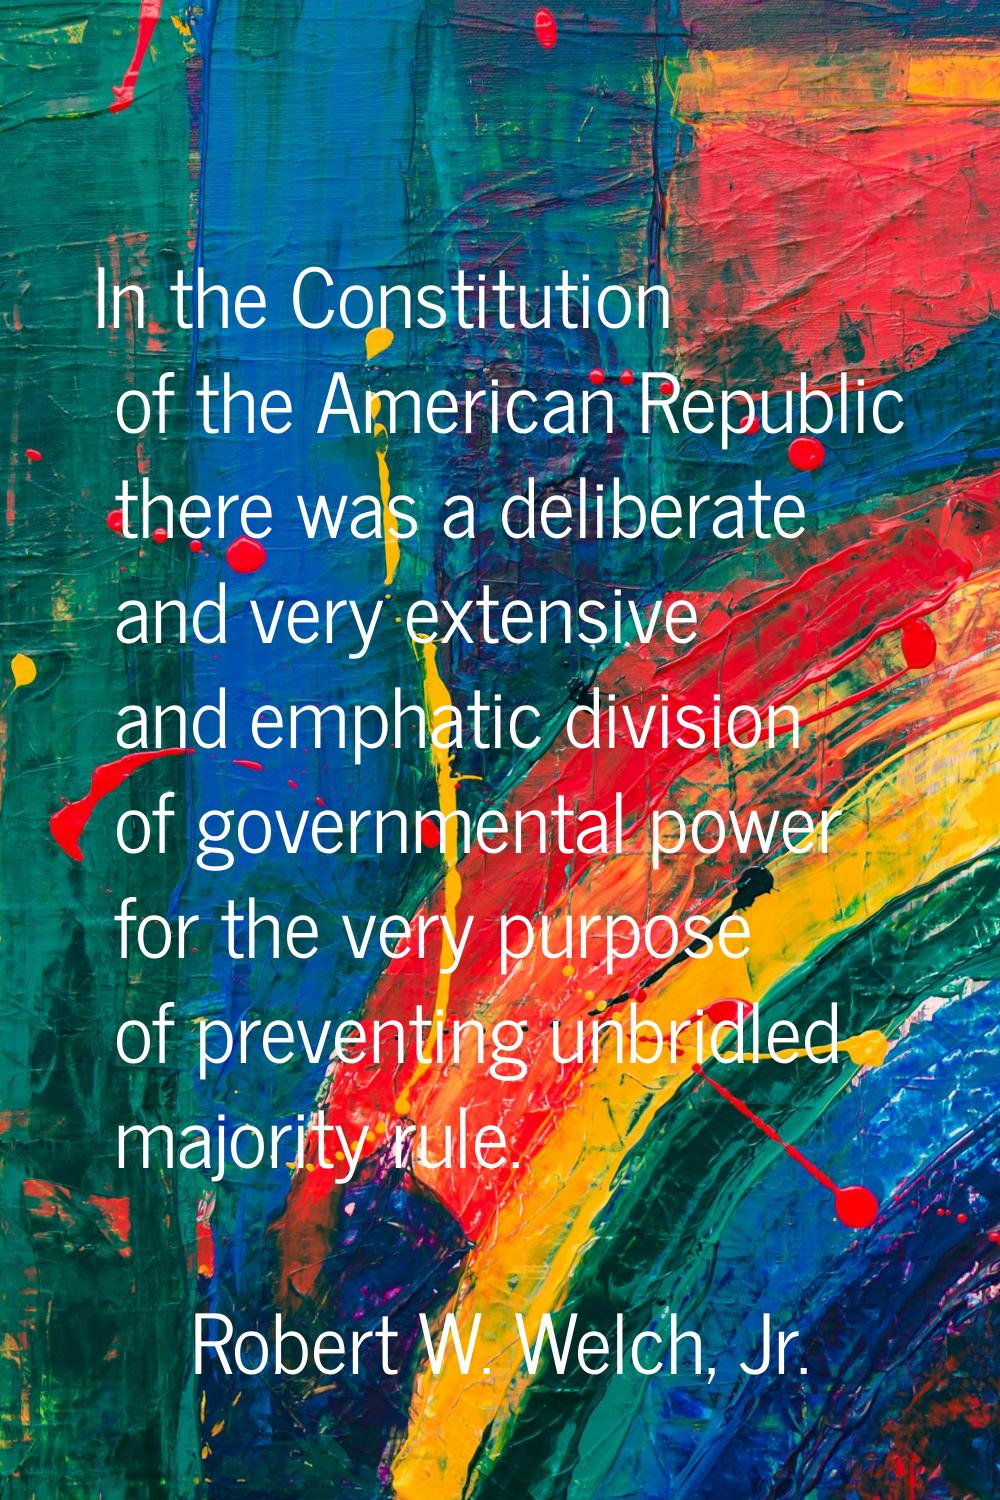 In the Constitution of the American Republic there was a deliberate and very extensive and emphatic